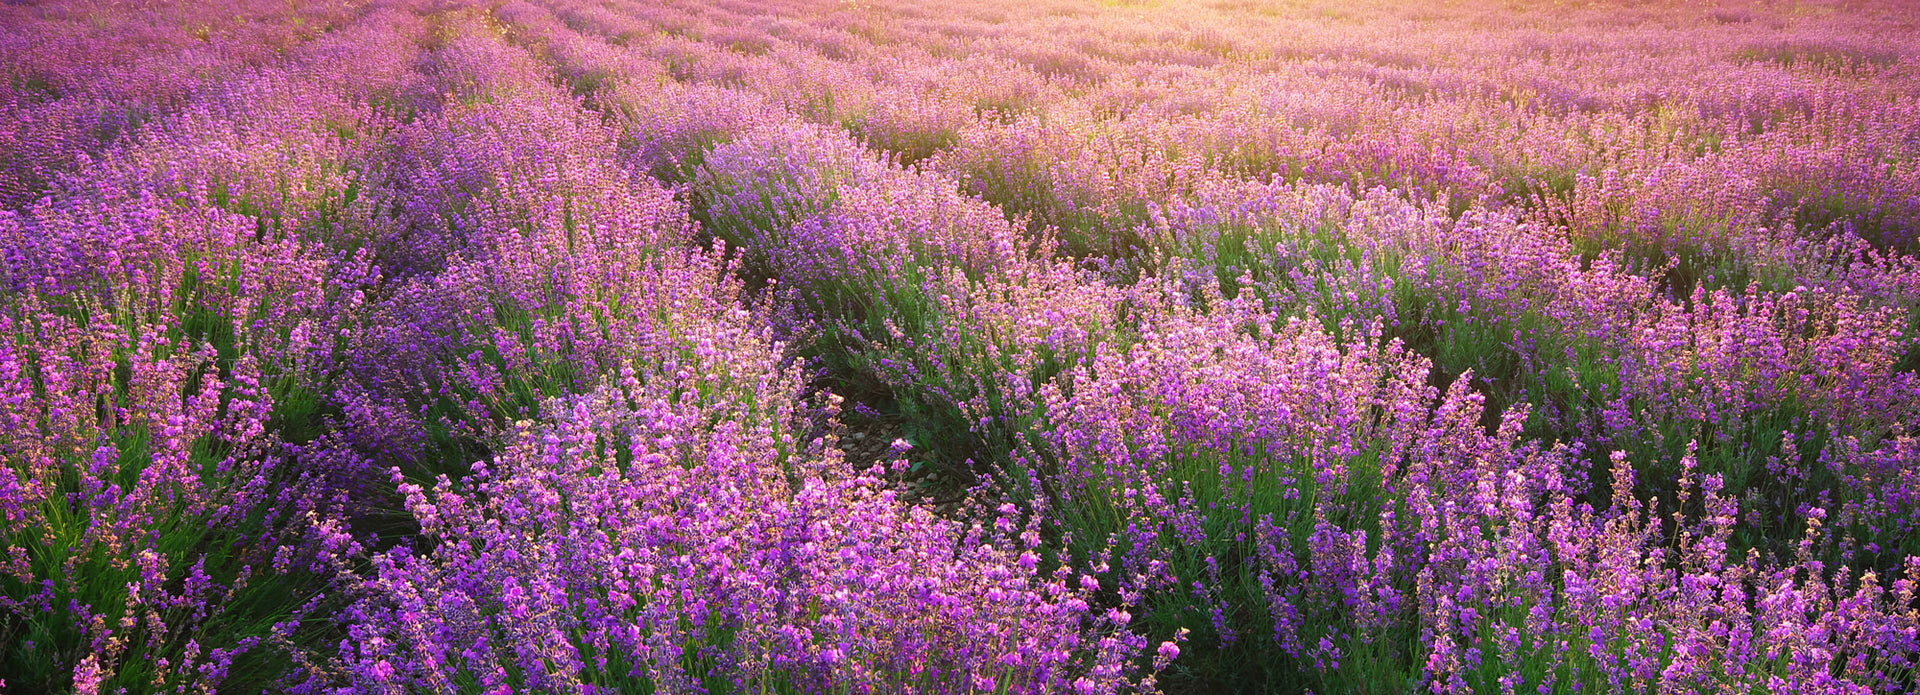 Load video: Peaceful tranquility is found in abundance when presented with the all-natural effects of Lavender.